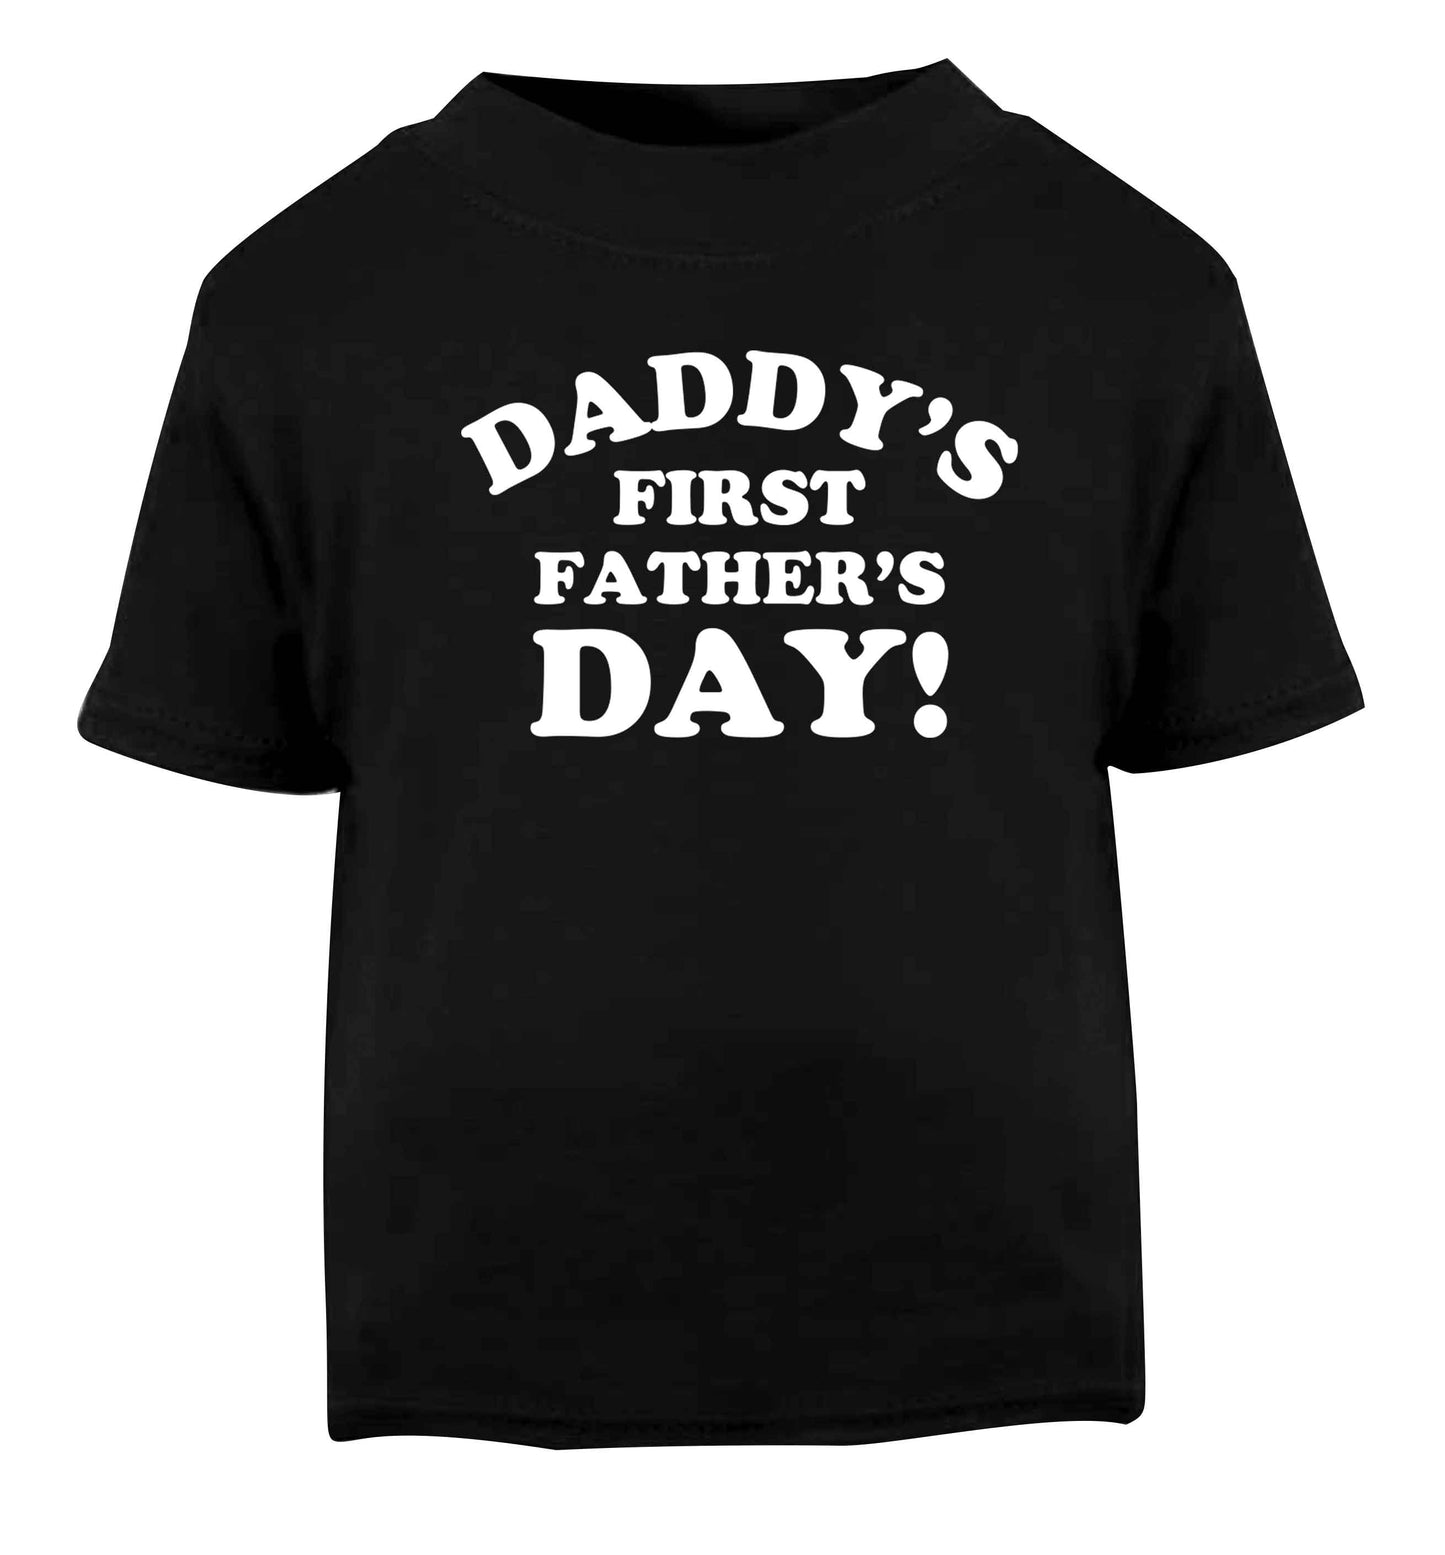 Daddy's first father's day Black baby toddler Tshirt 2 years